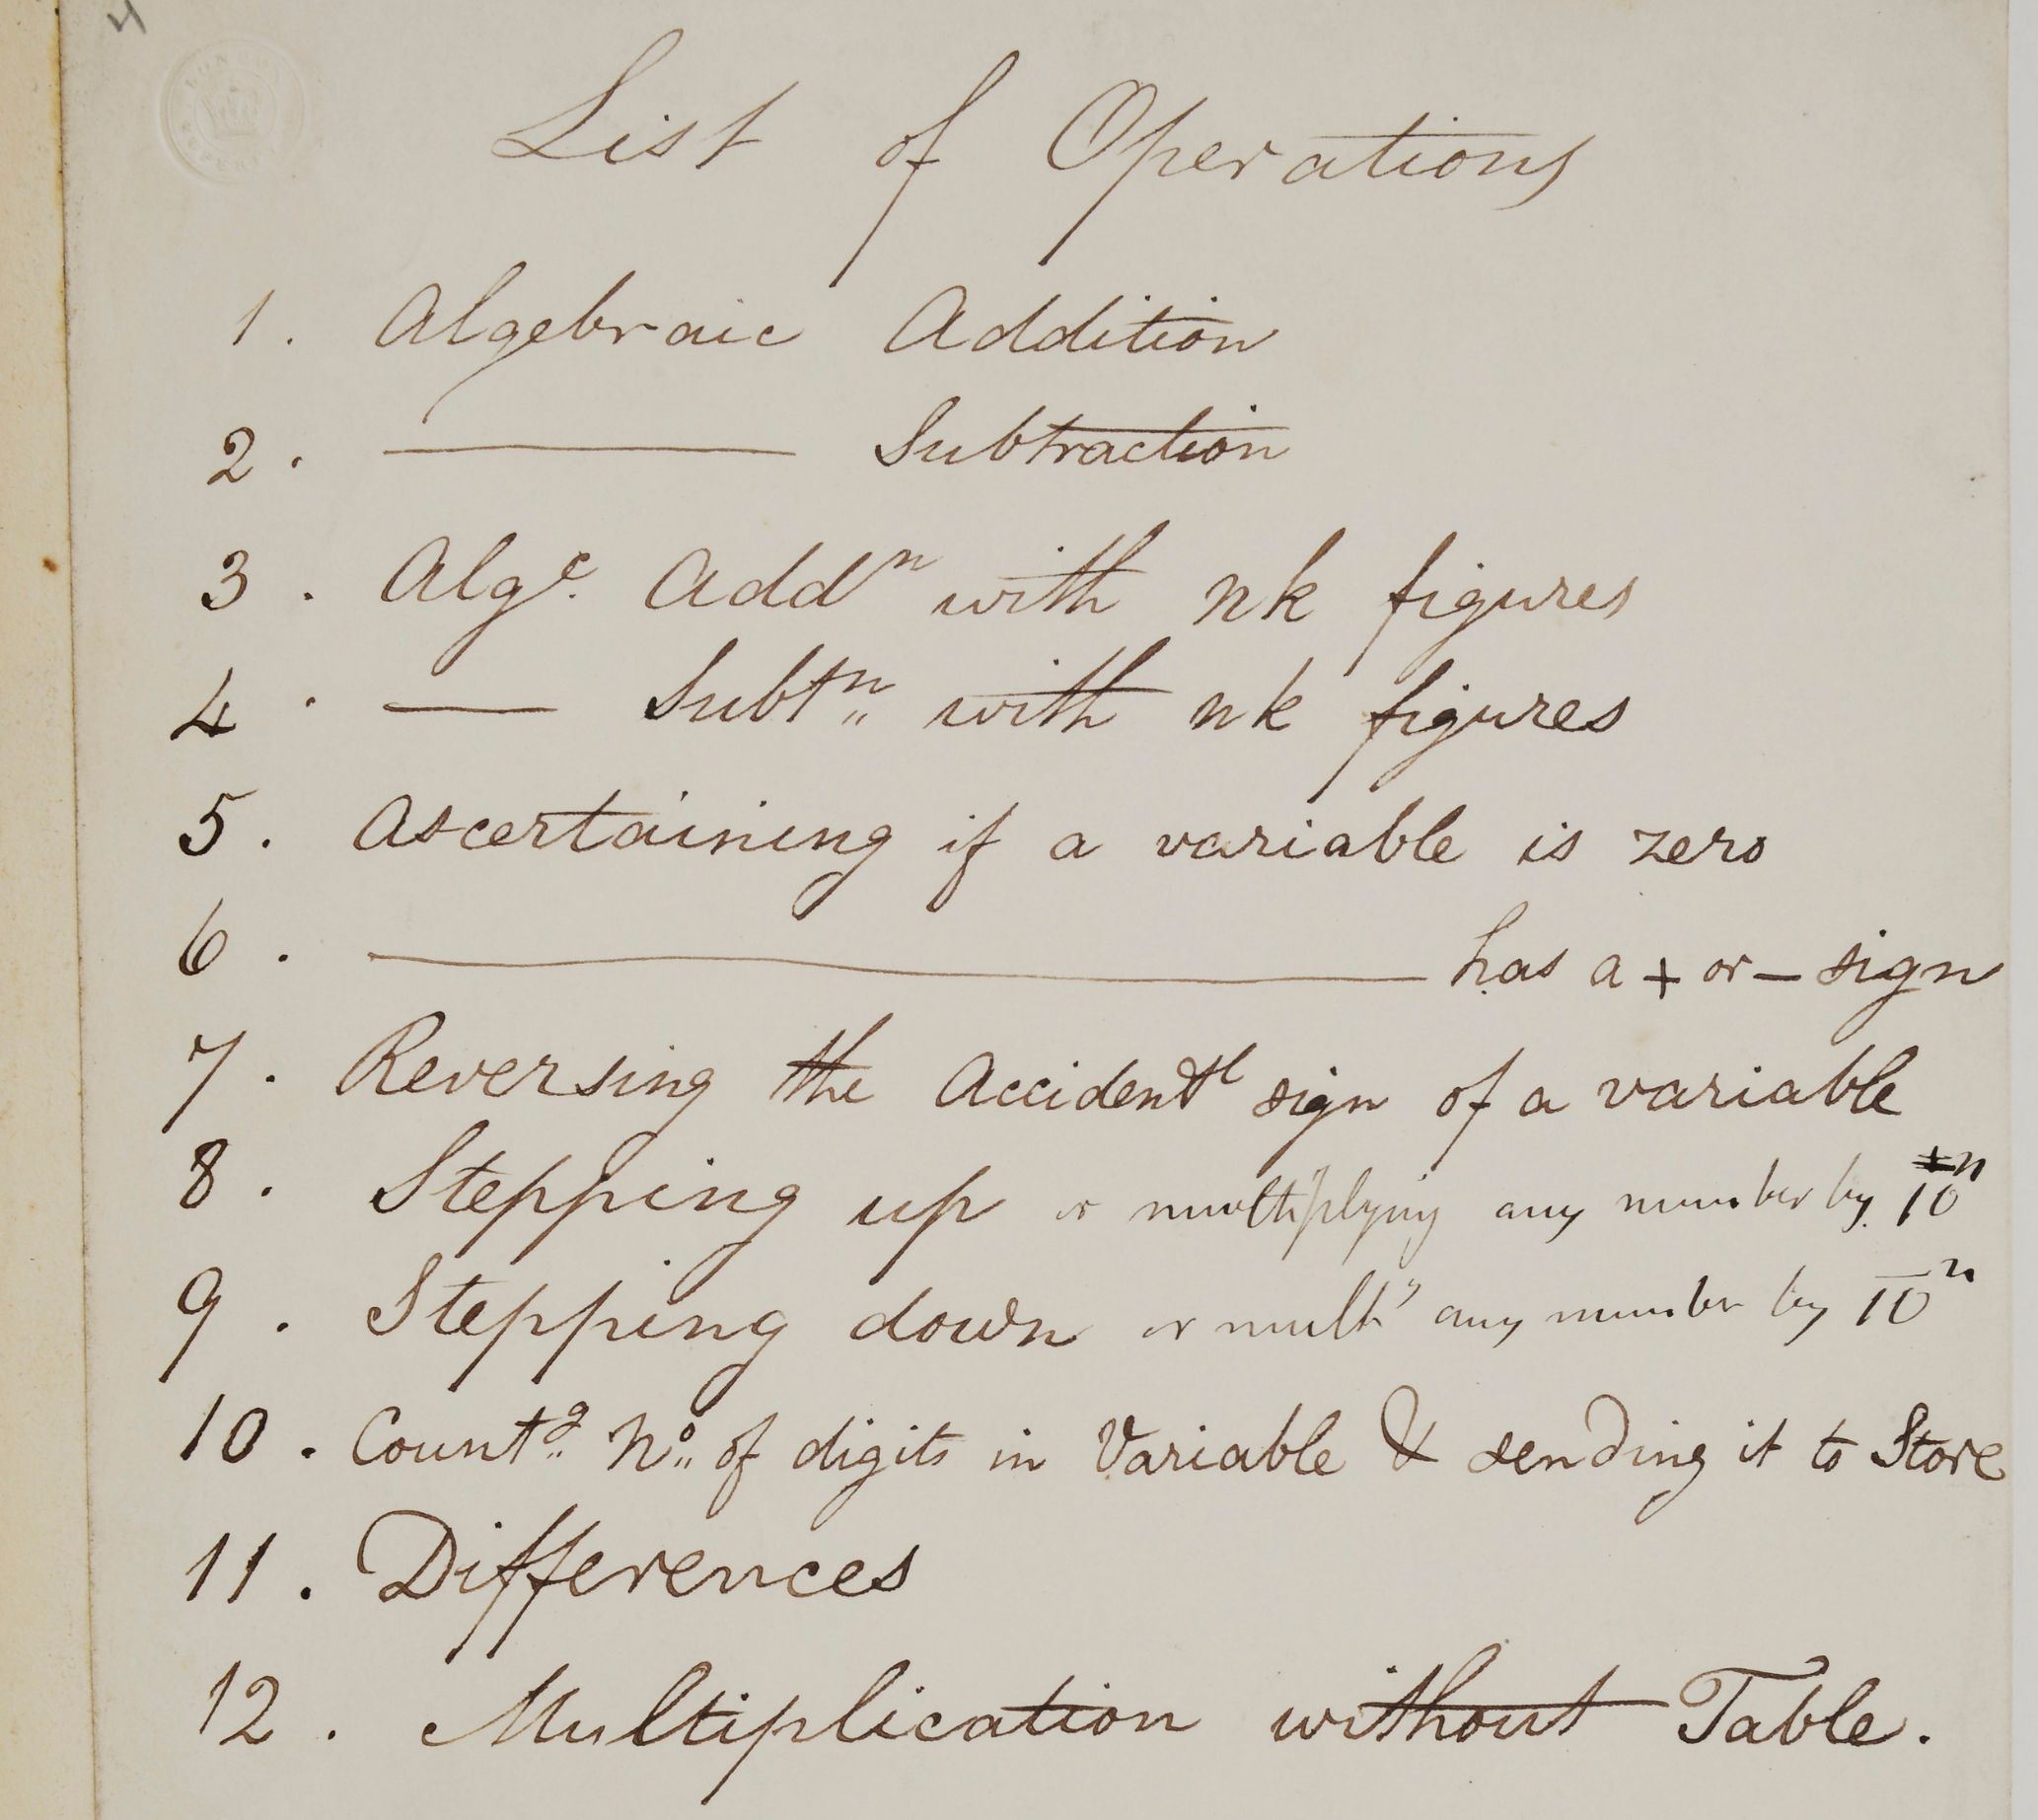 Charles Babbage's List of operations MS Buxton 7.6